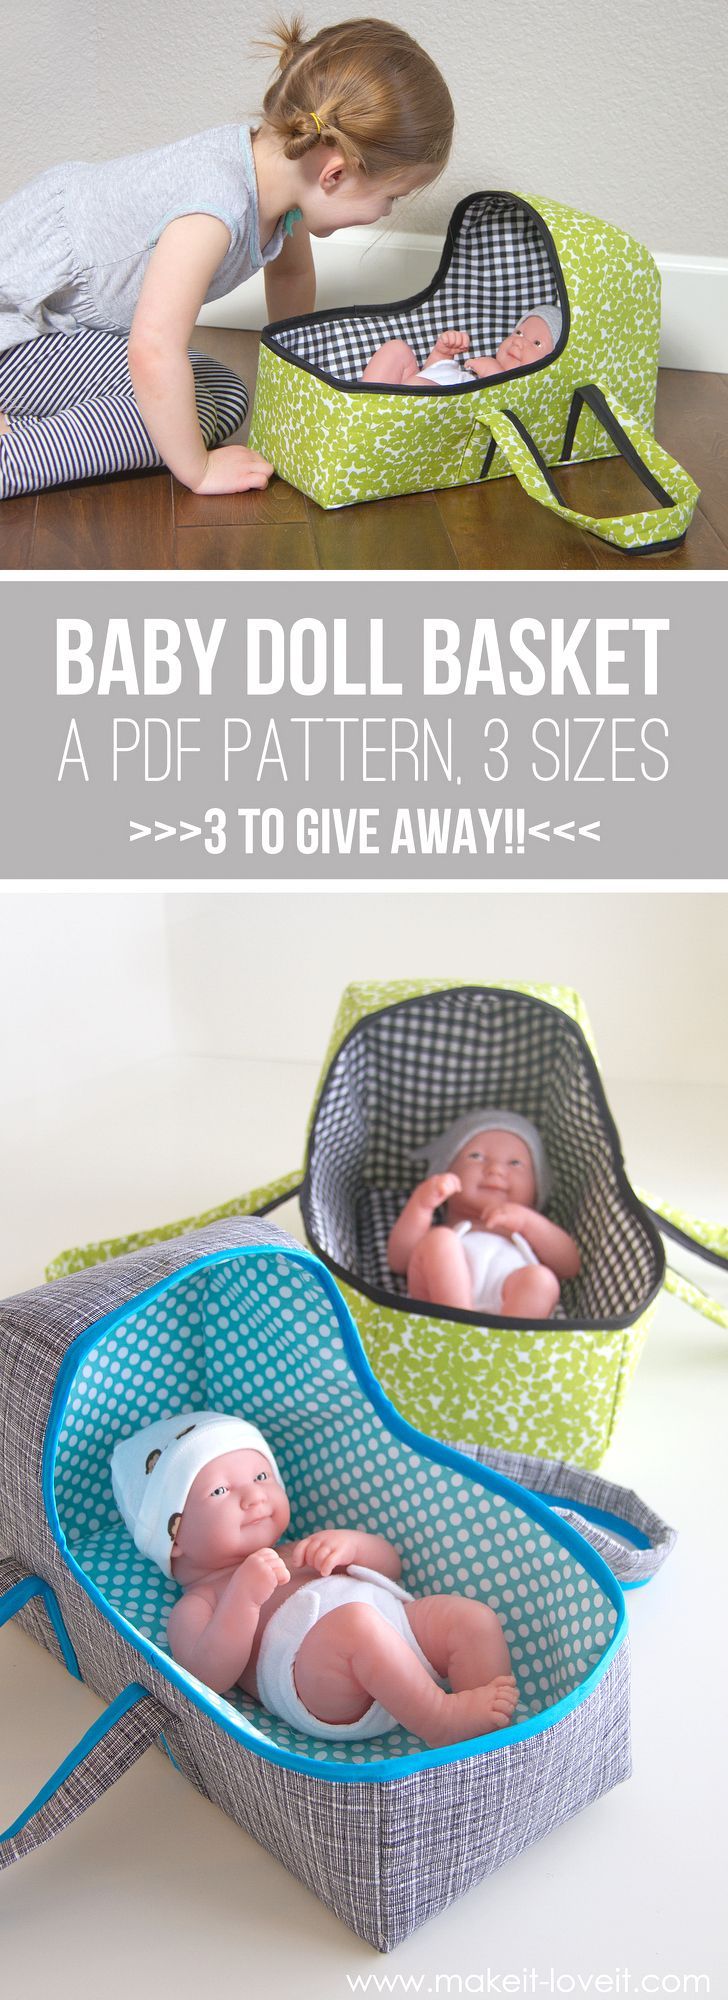 Baby Doll Basket Carrier…a PDF pattern, 3 sizes, plenty of pictures. 3 patterns to GIVE AWAY! | via Make It and Love It